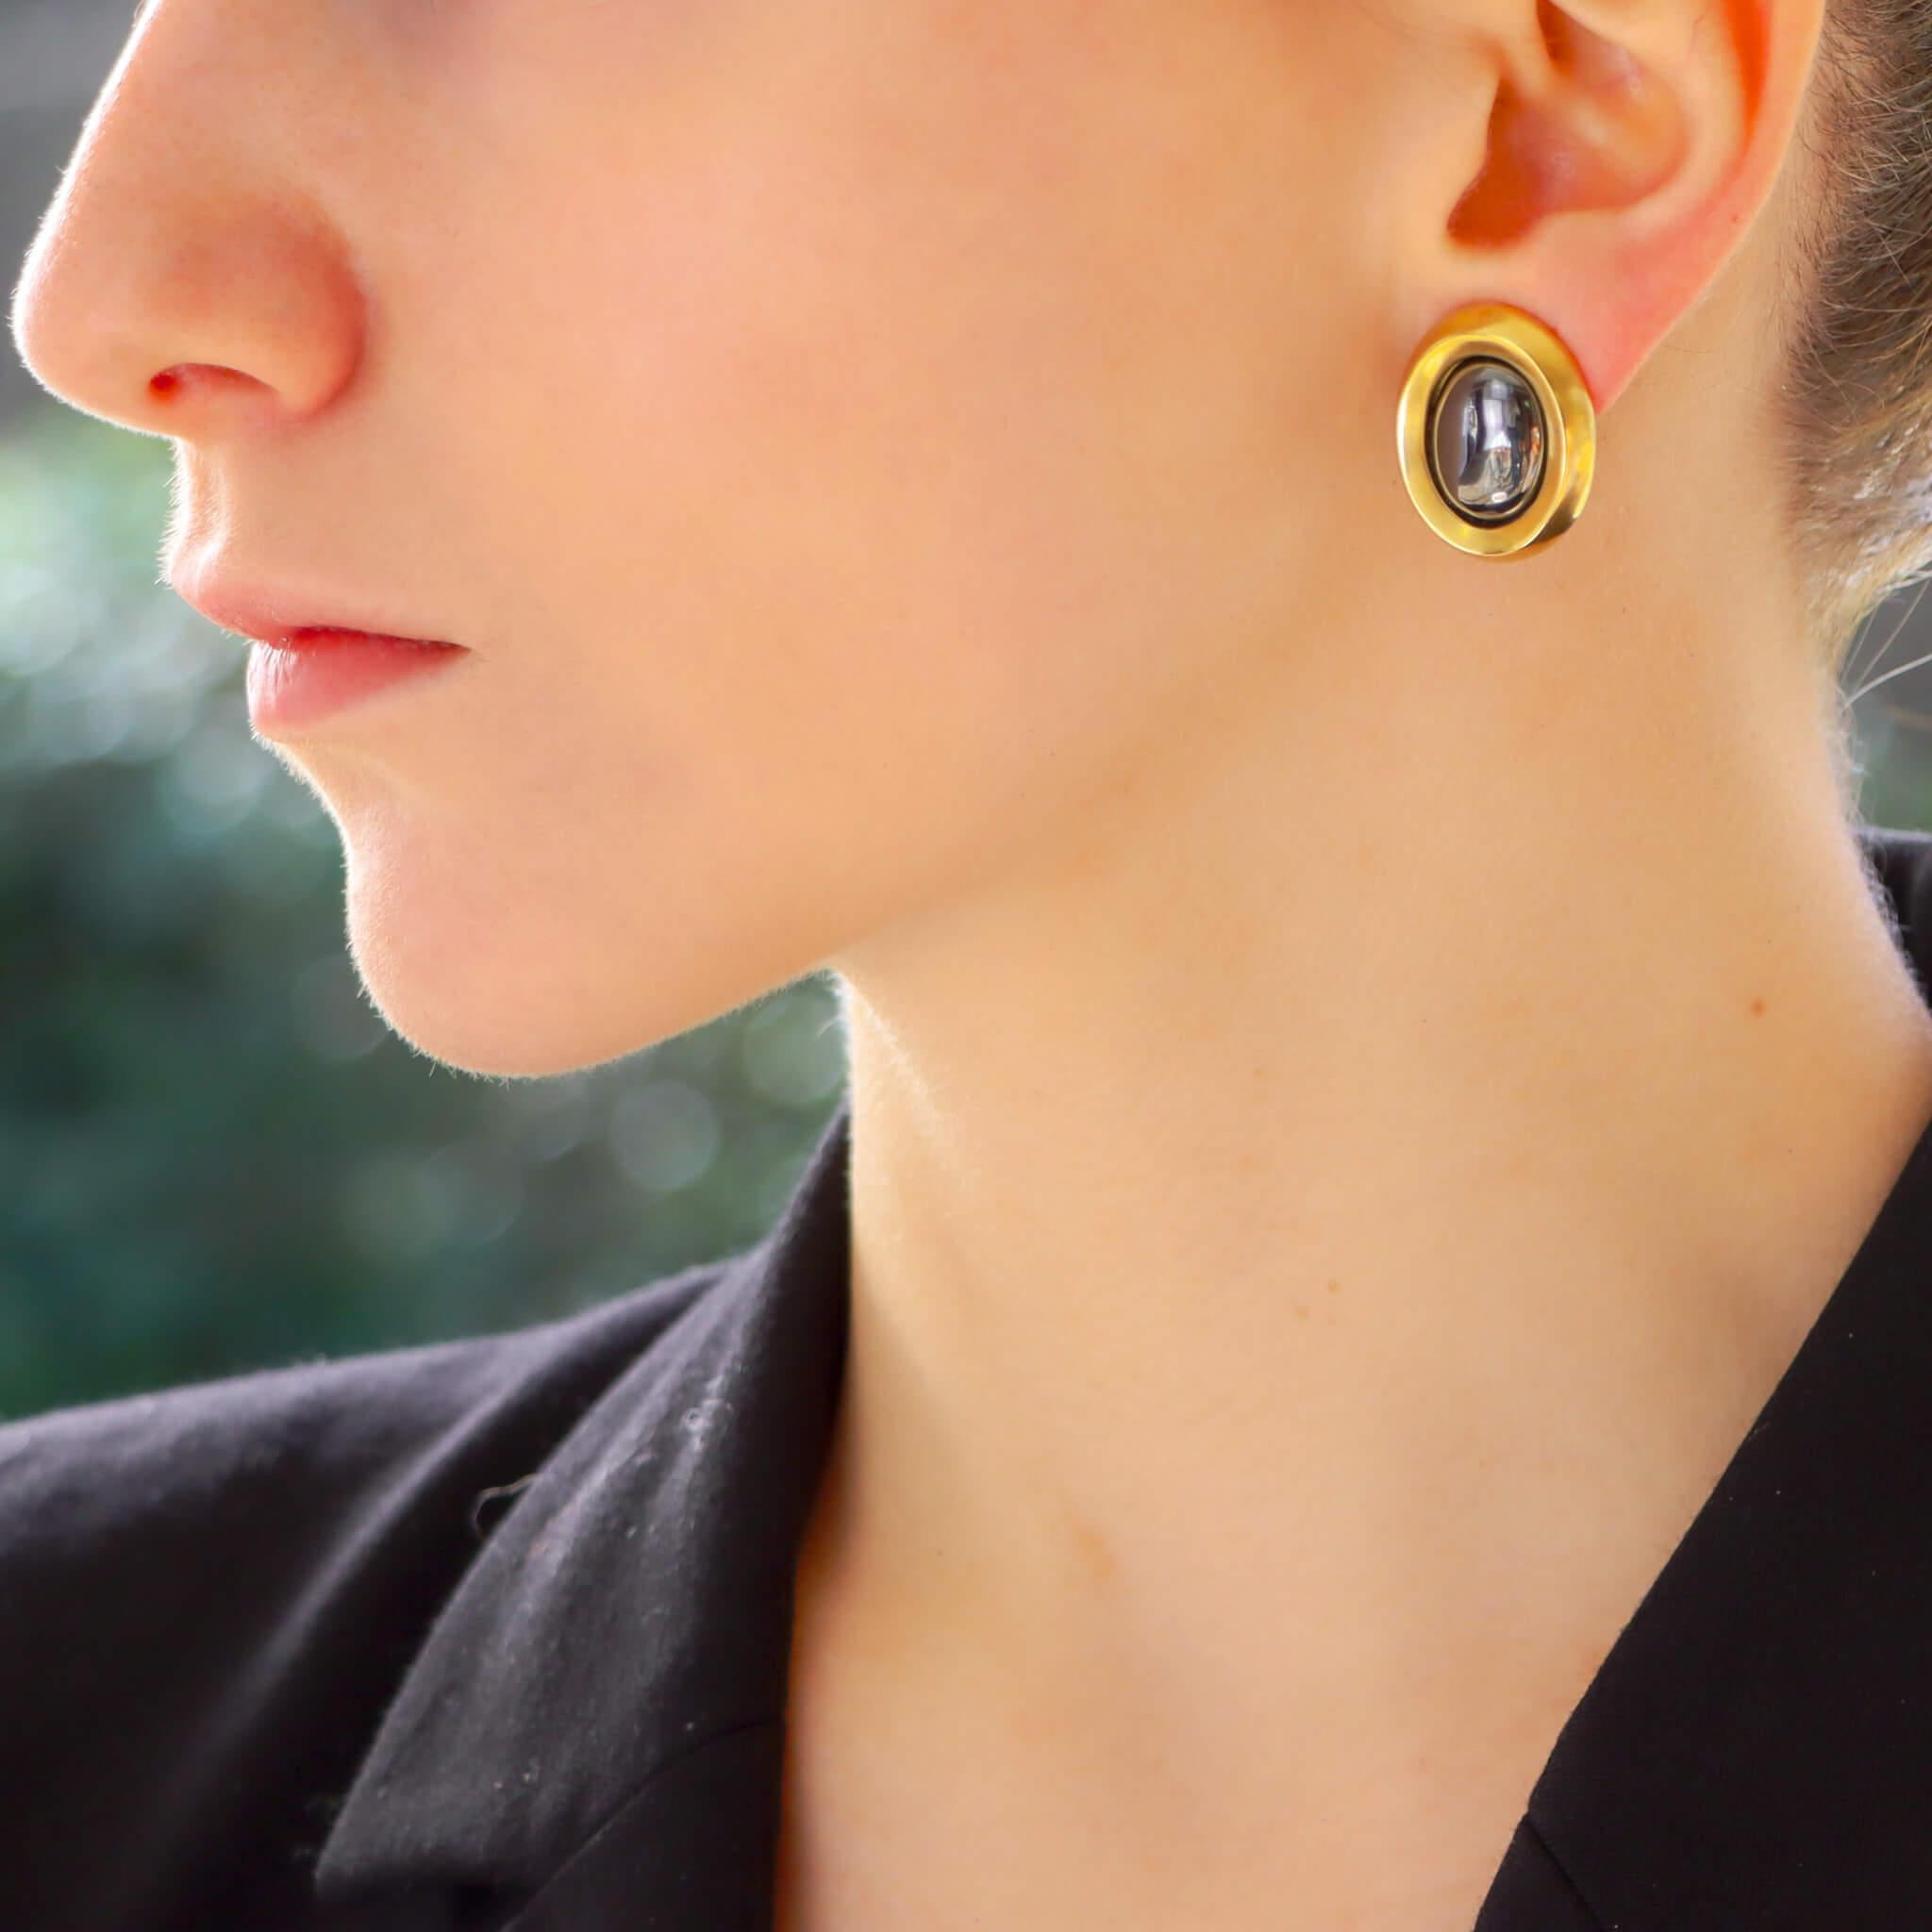 A beautiful vintage pair of Angela Cummings retro inspired earrings set in 18k yellow gold and hematite.

Each earring is centrally set with a metallic lustrous piece of hematite. The hematite is encased in a ‘frame’ of brushed yellow gold. The